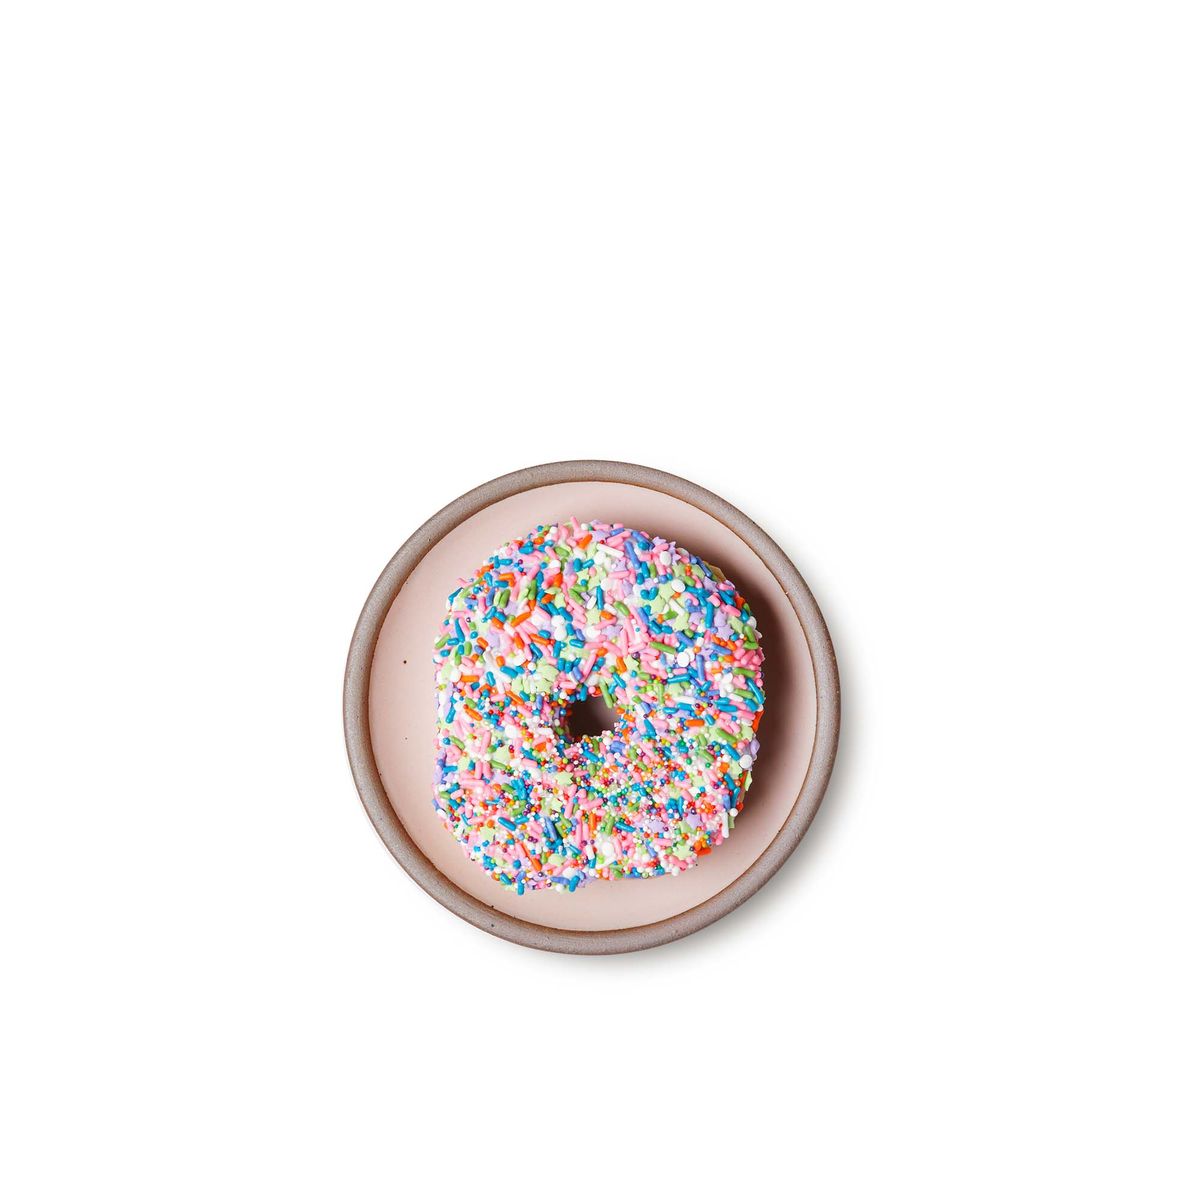 A sprinkled donut on a dessert sized ceramic plate in a soft light pink color featuring iron speckles and an unglazed rim